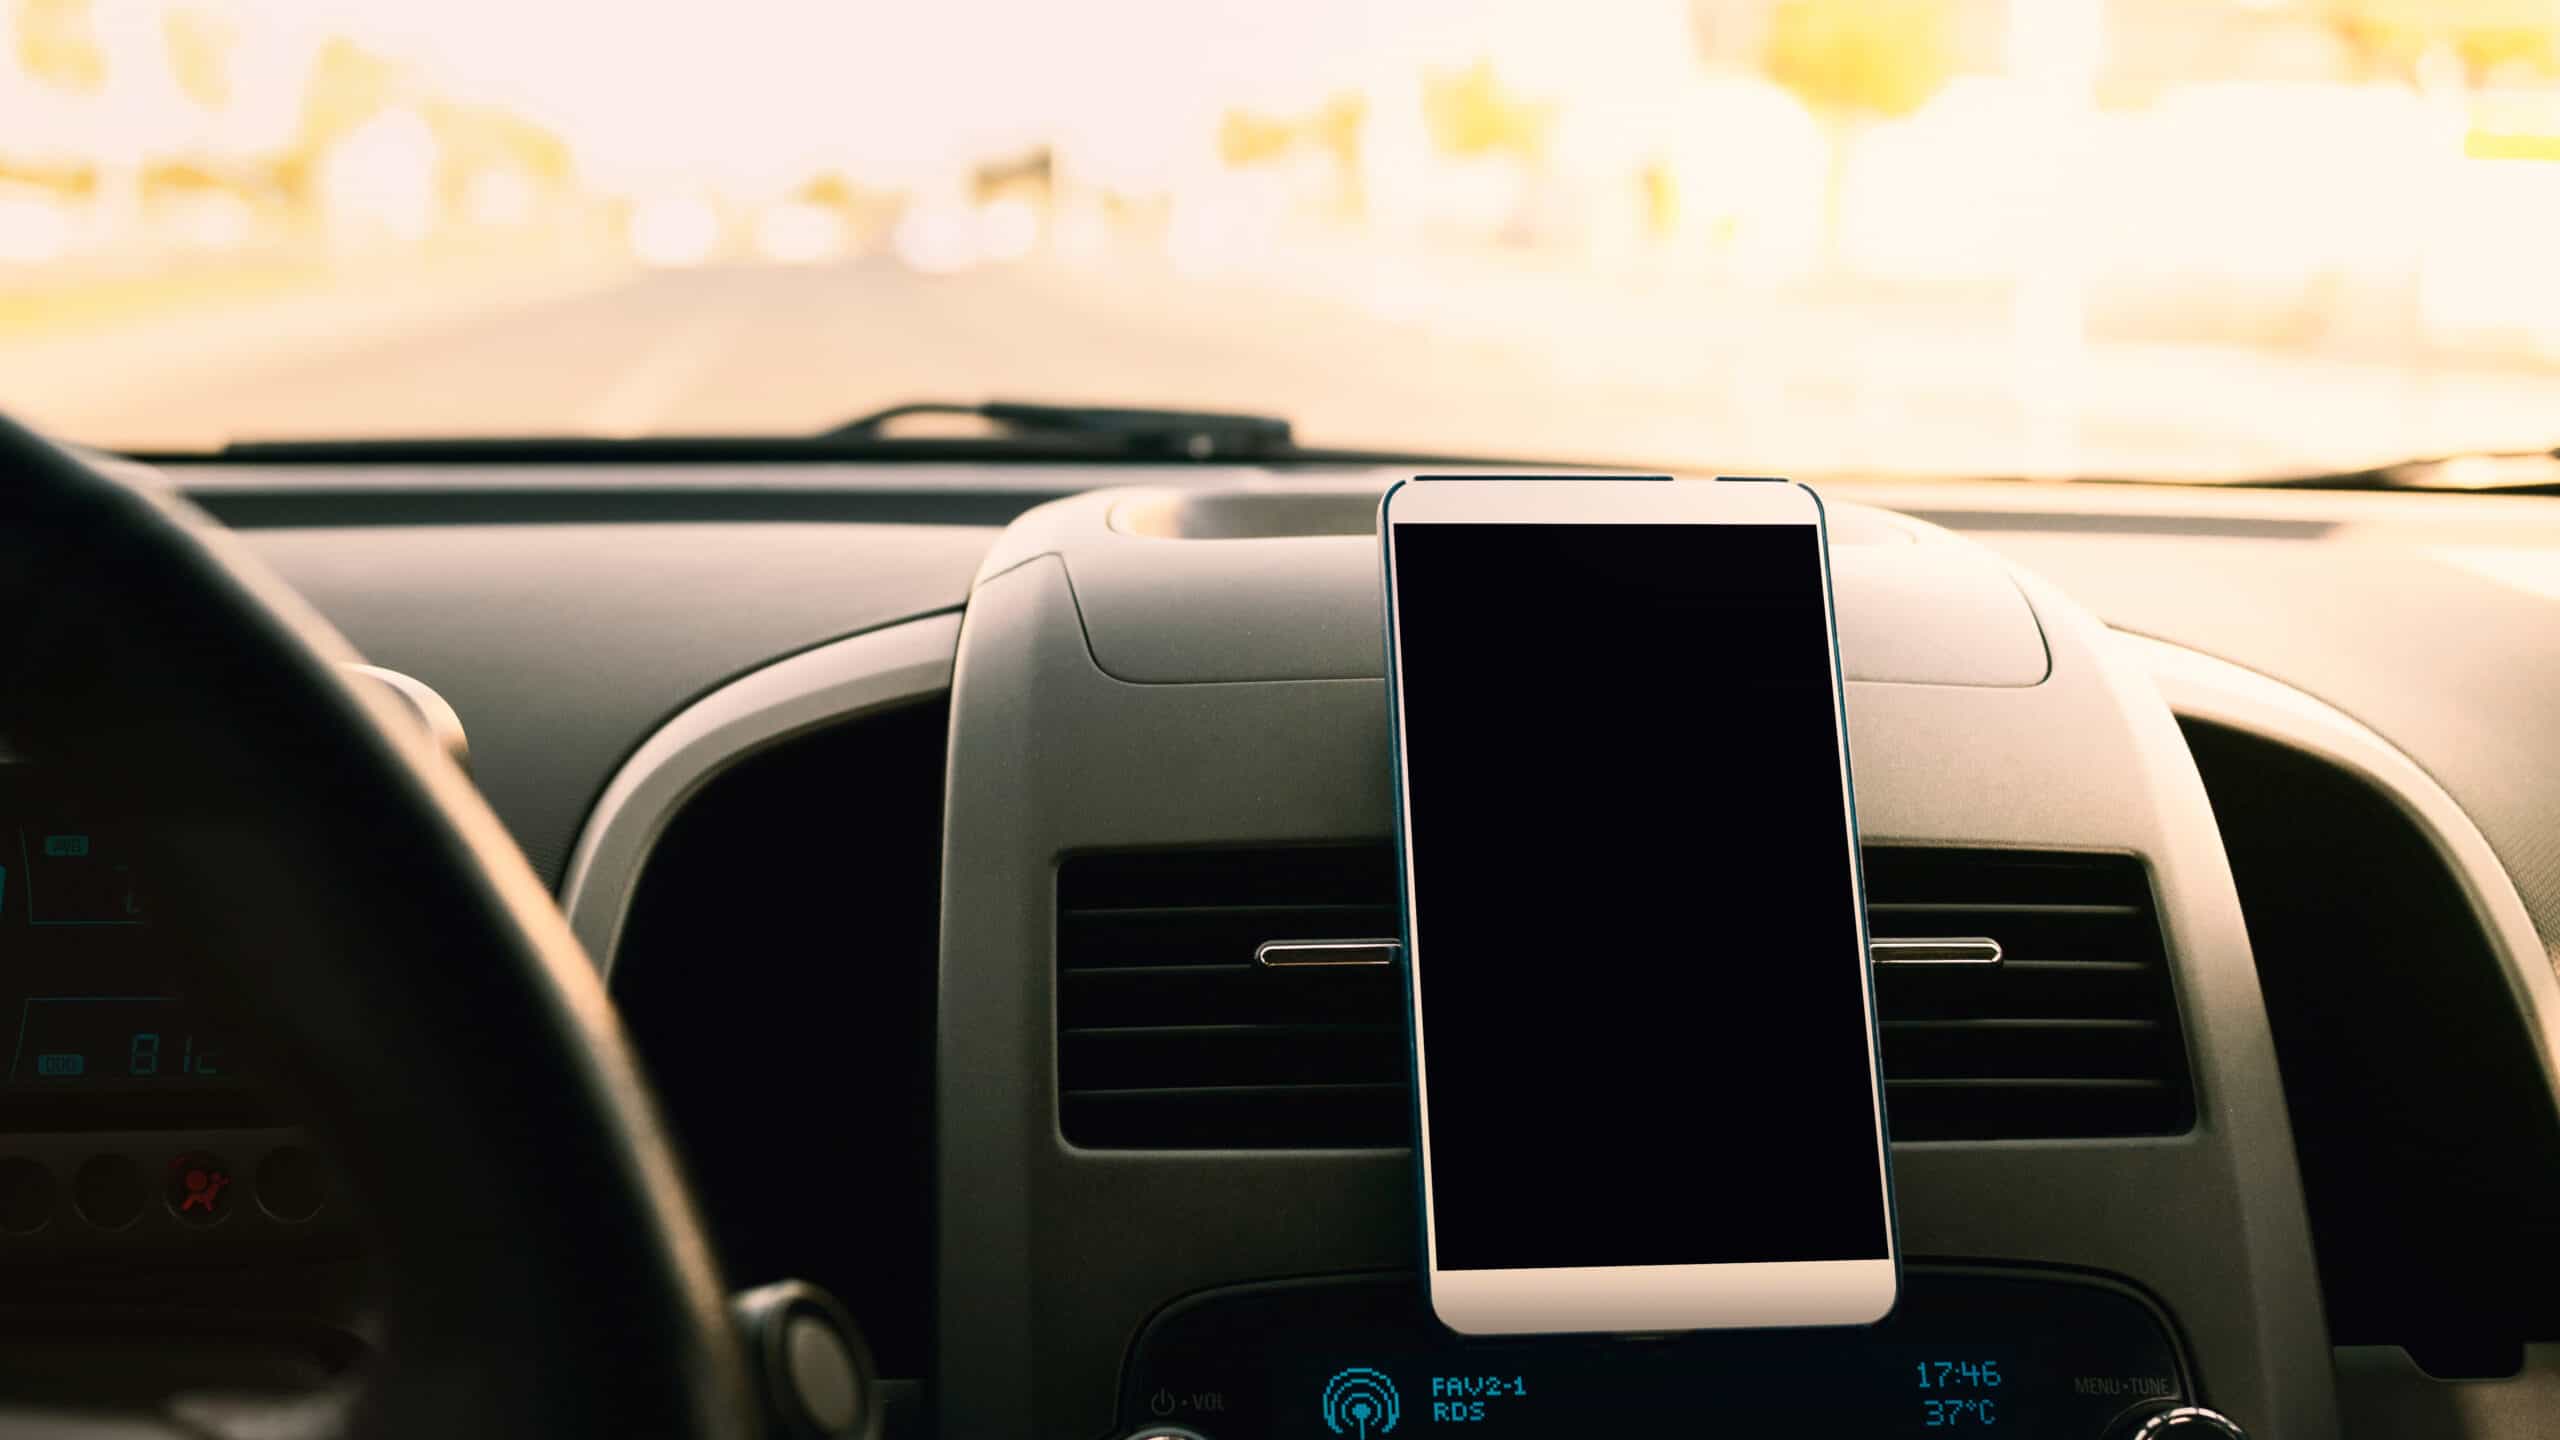 Reasons to Buy a Car Phone Mount